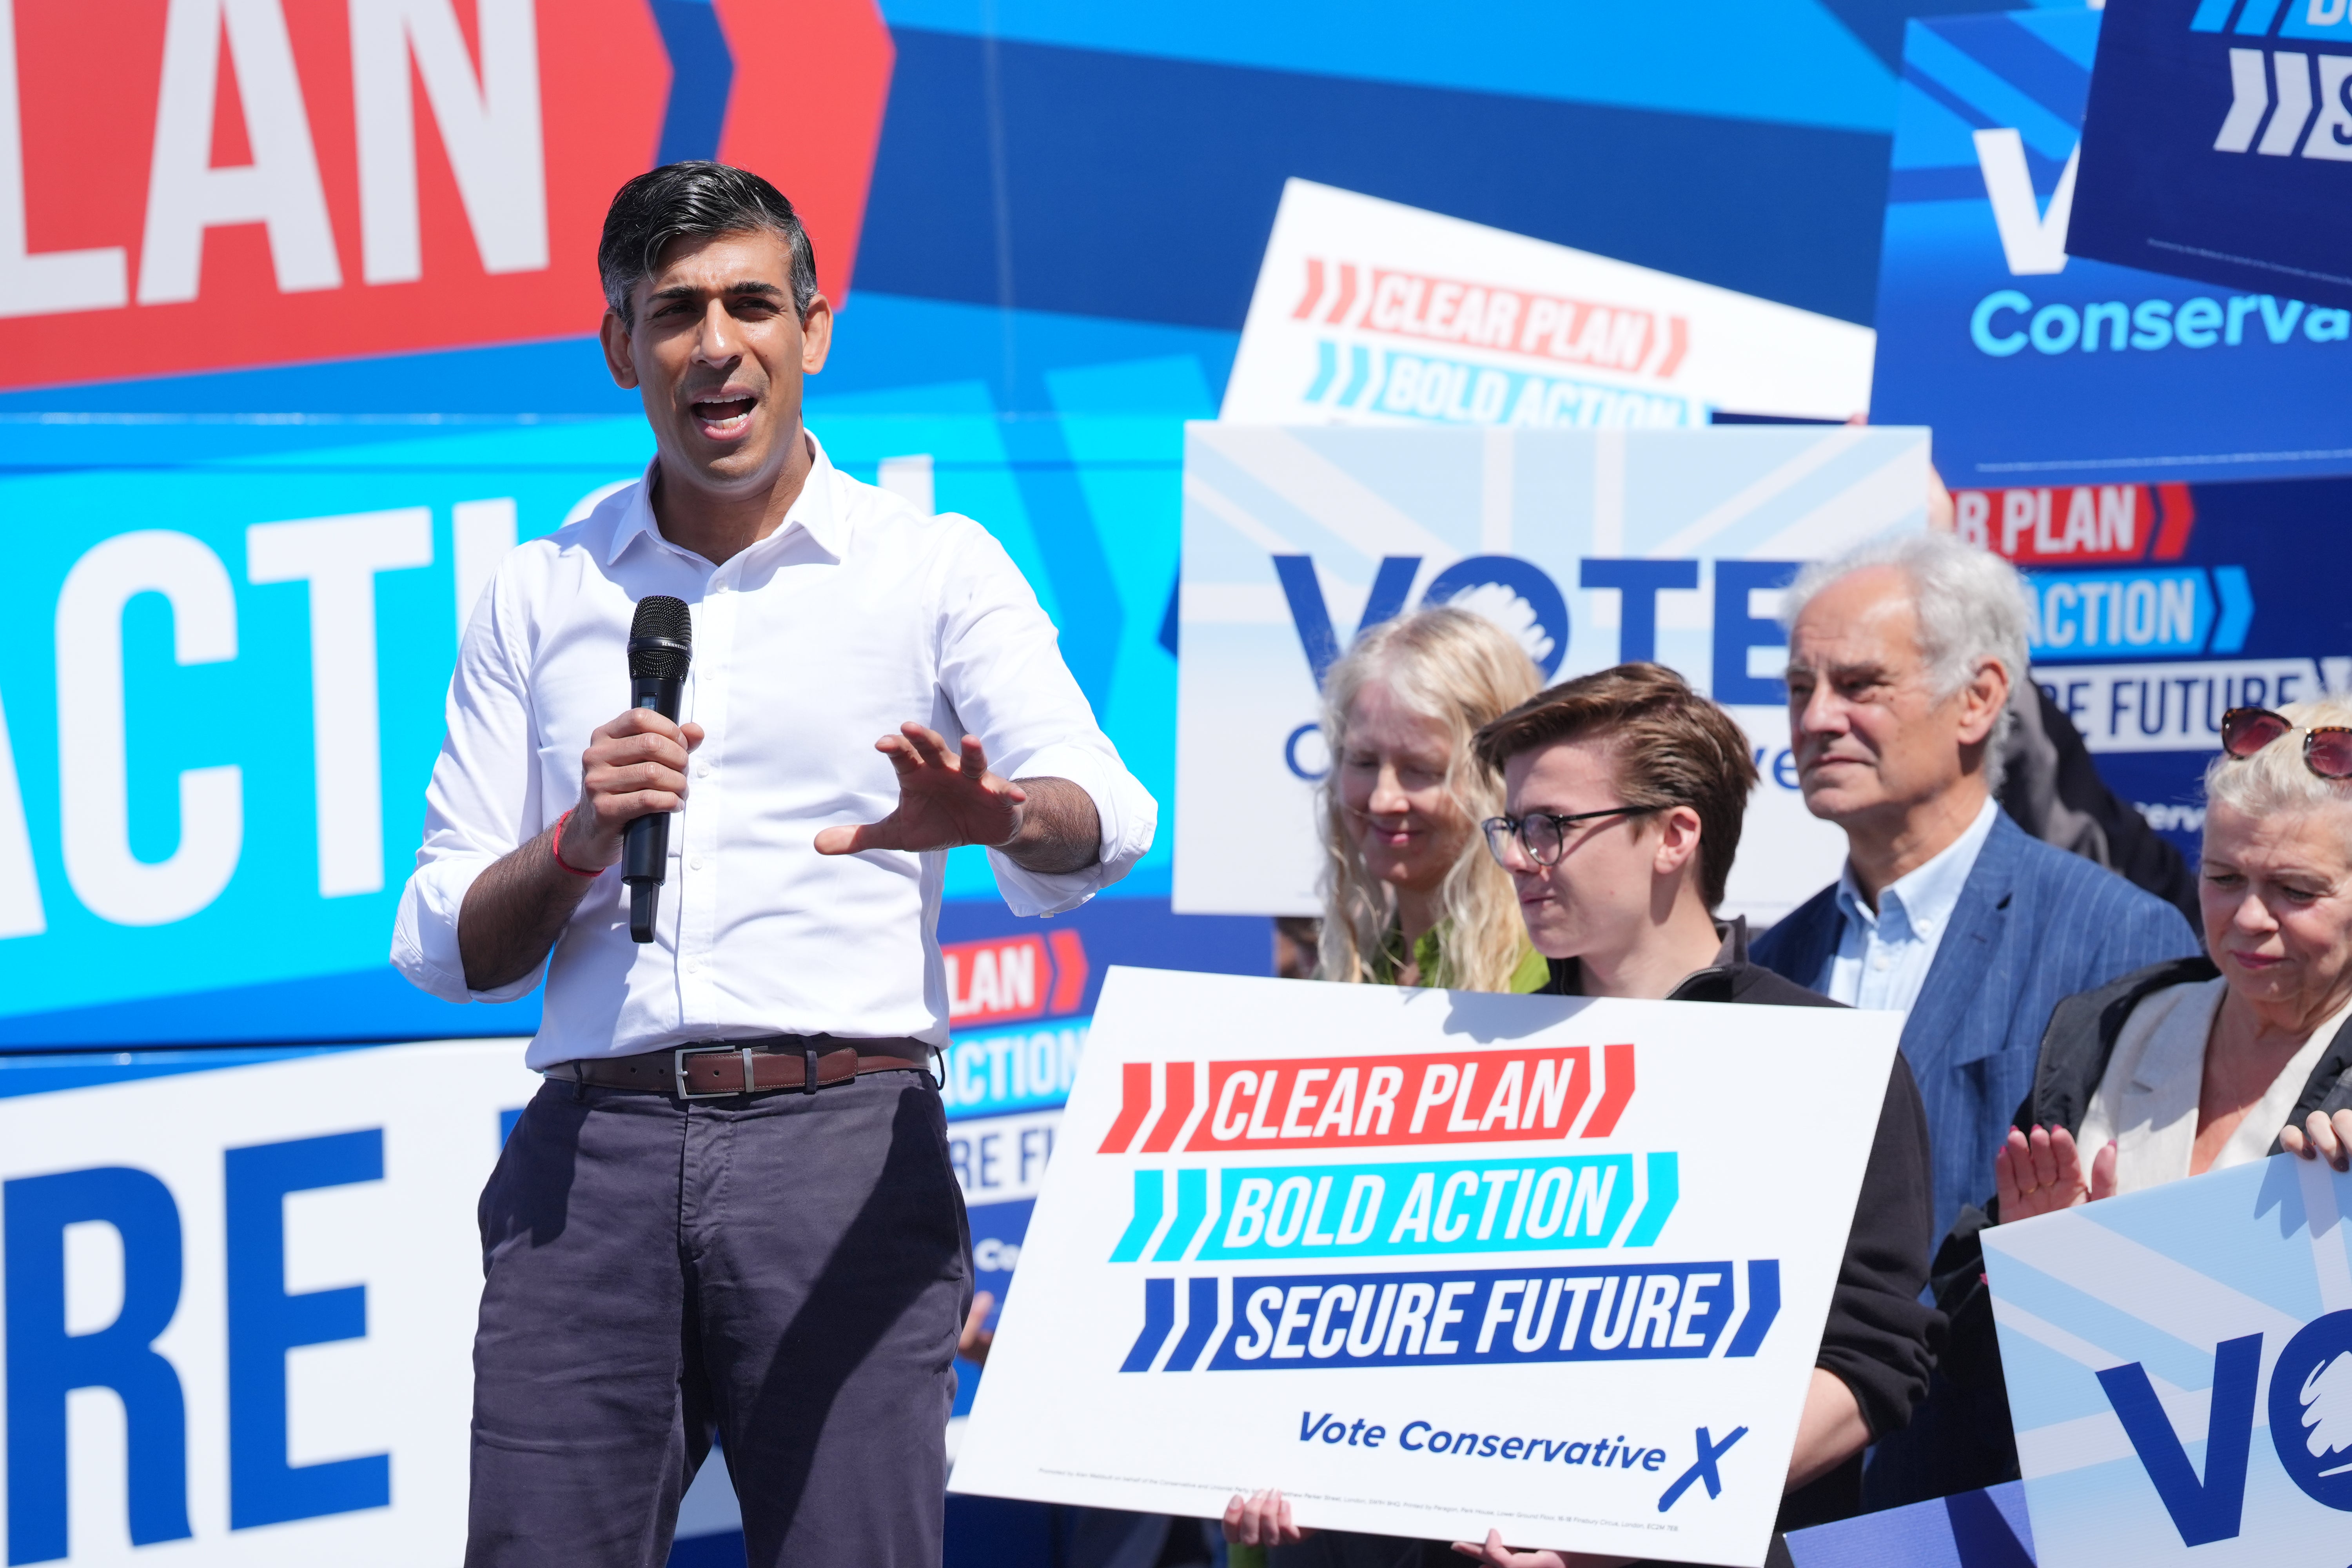 Prime Minister Rishi Sunak launches the Conservative campaign bus at Redcar Racecourse in north-east England.